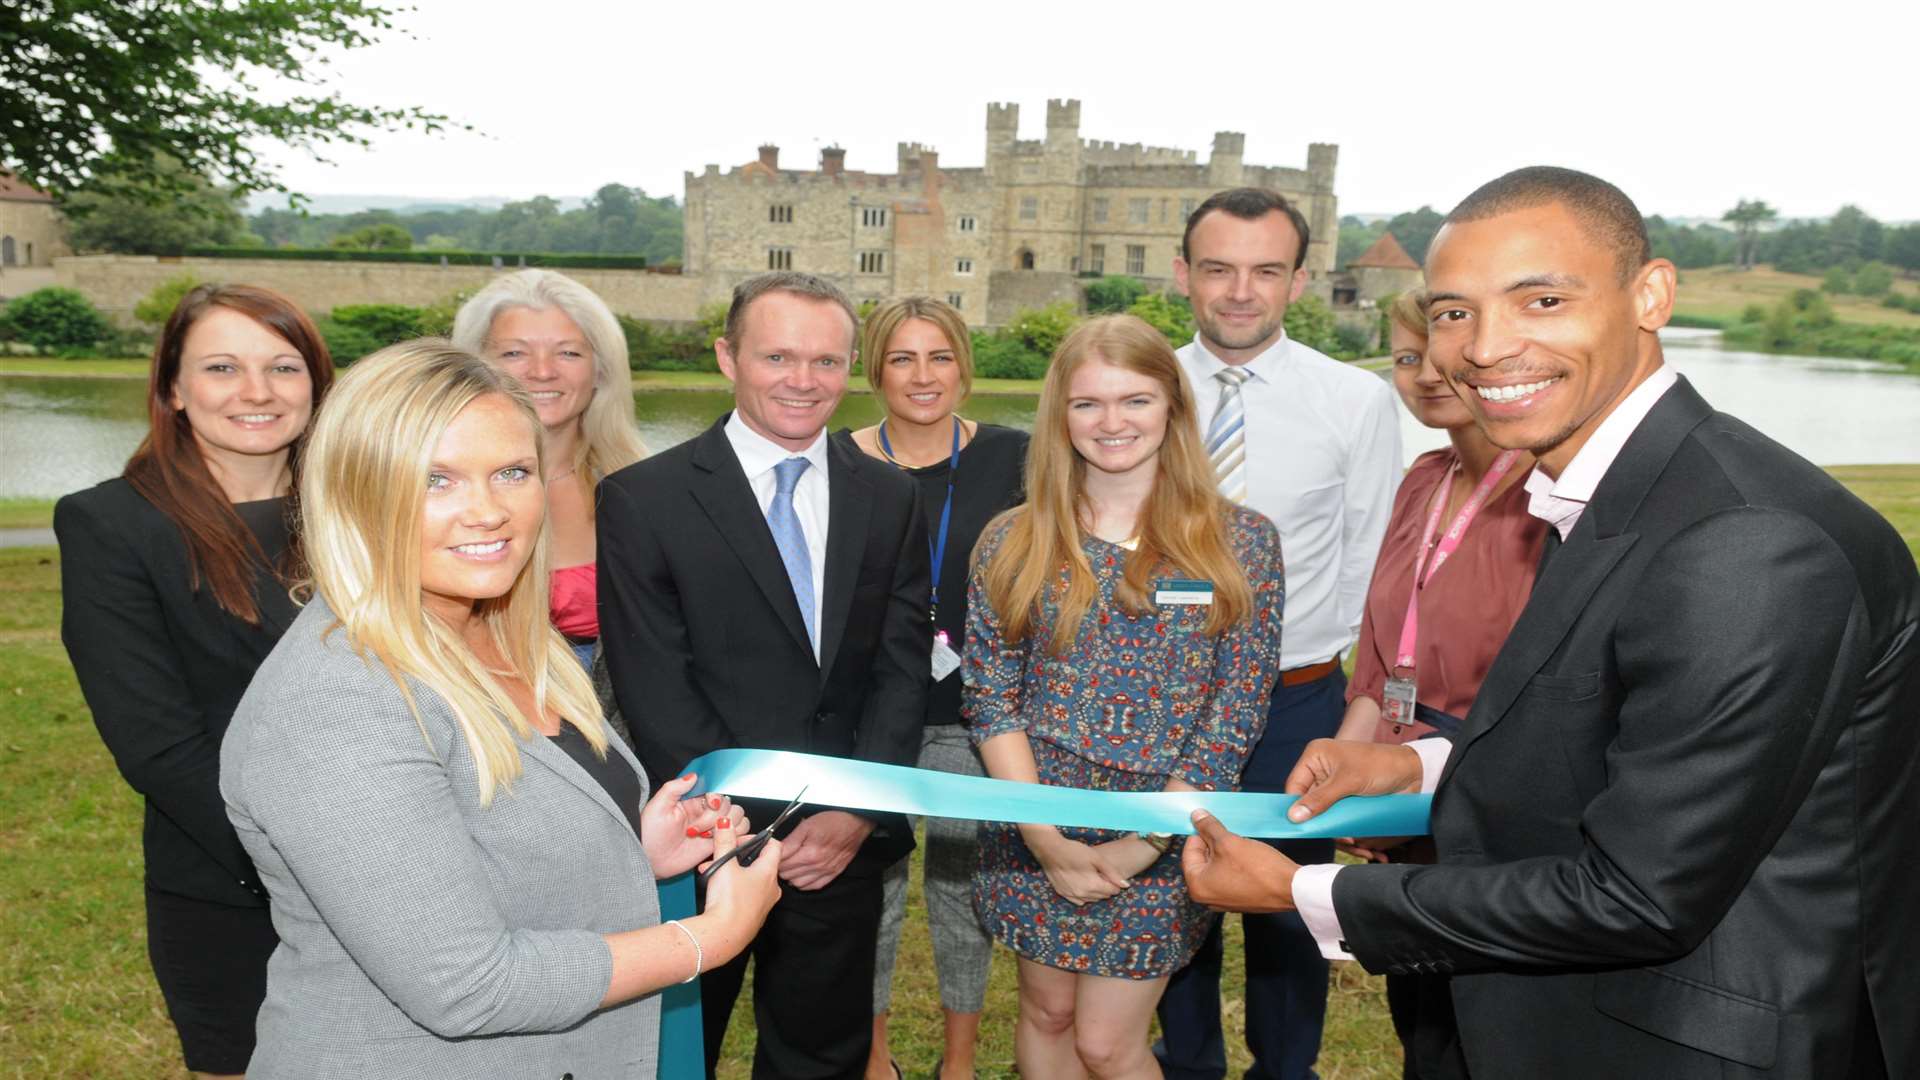 KM Walk to School supporters celebrate the start of walk to school month by cutting a ribbon at Leeds Castle. Front: Helen Critcher (Golding Vision) and Eric Hodges (Orbit South) with Countrystyle Recycling, Kent County Council, Medway Council and Three R’s Teacher Recruitment.